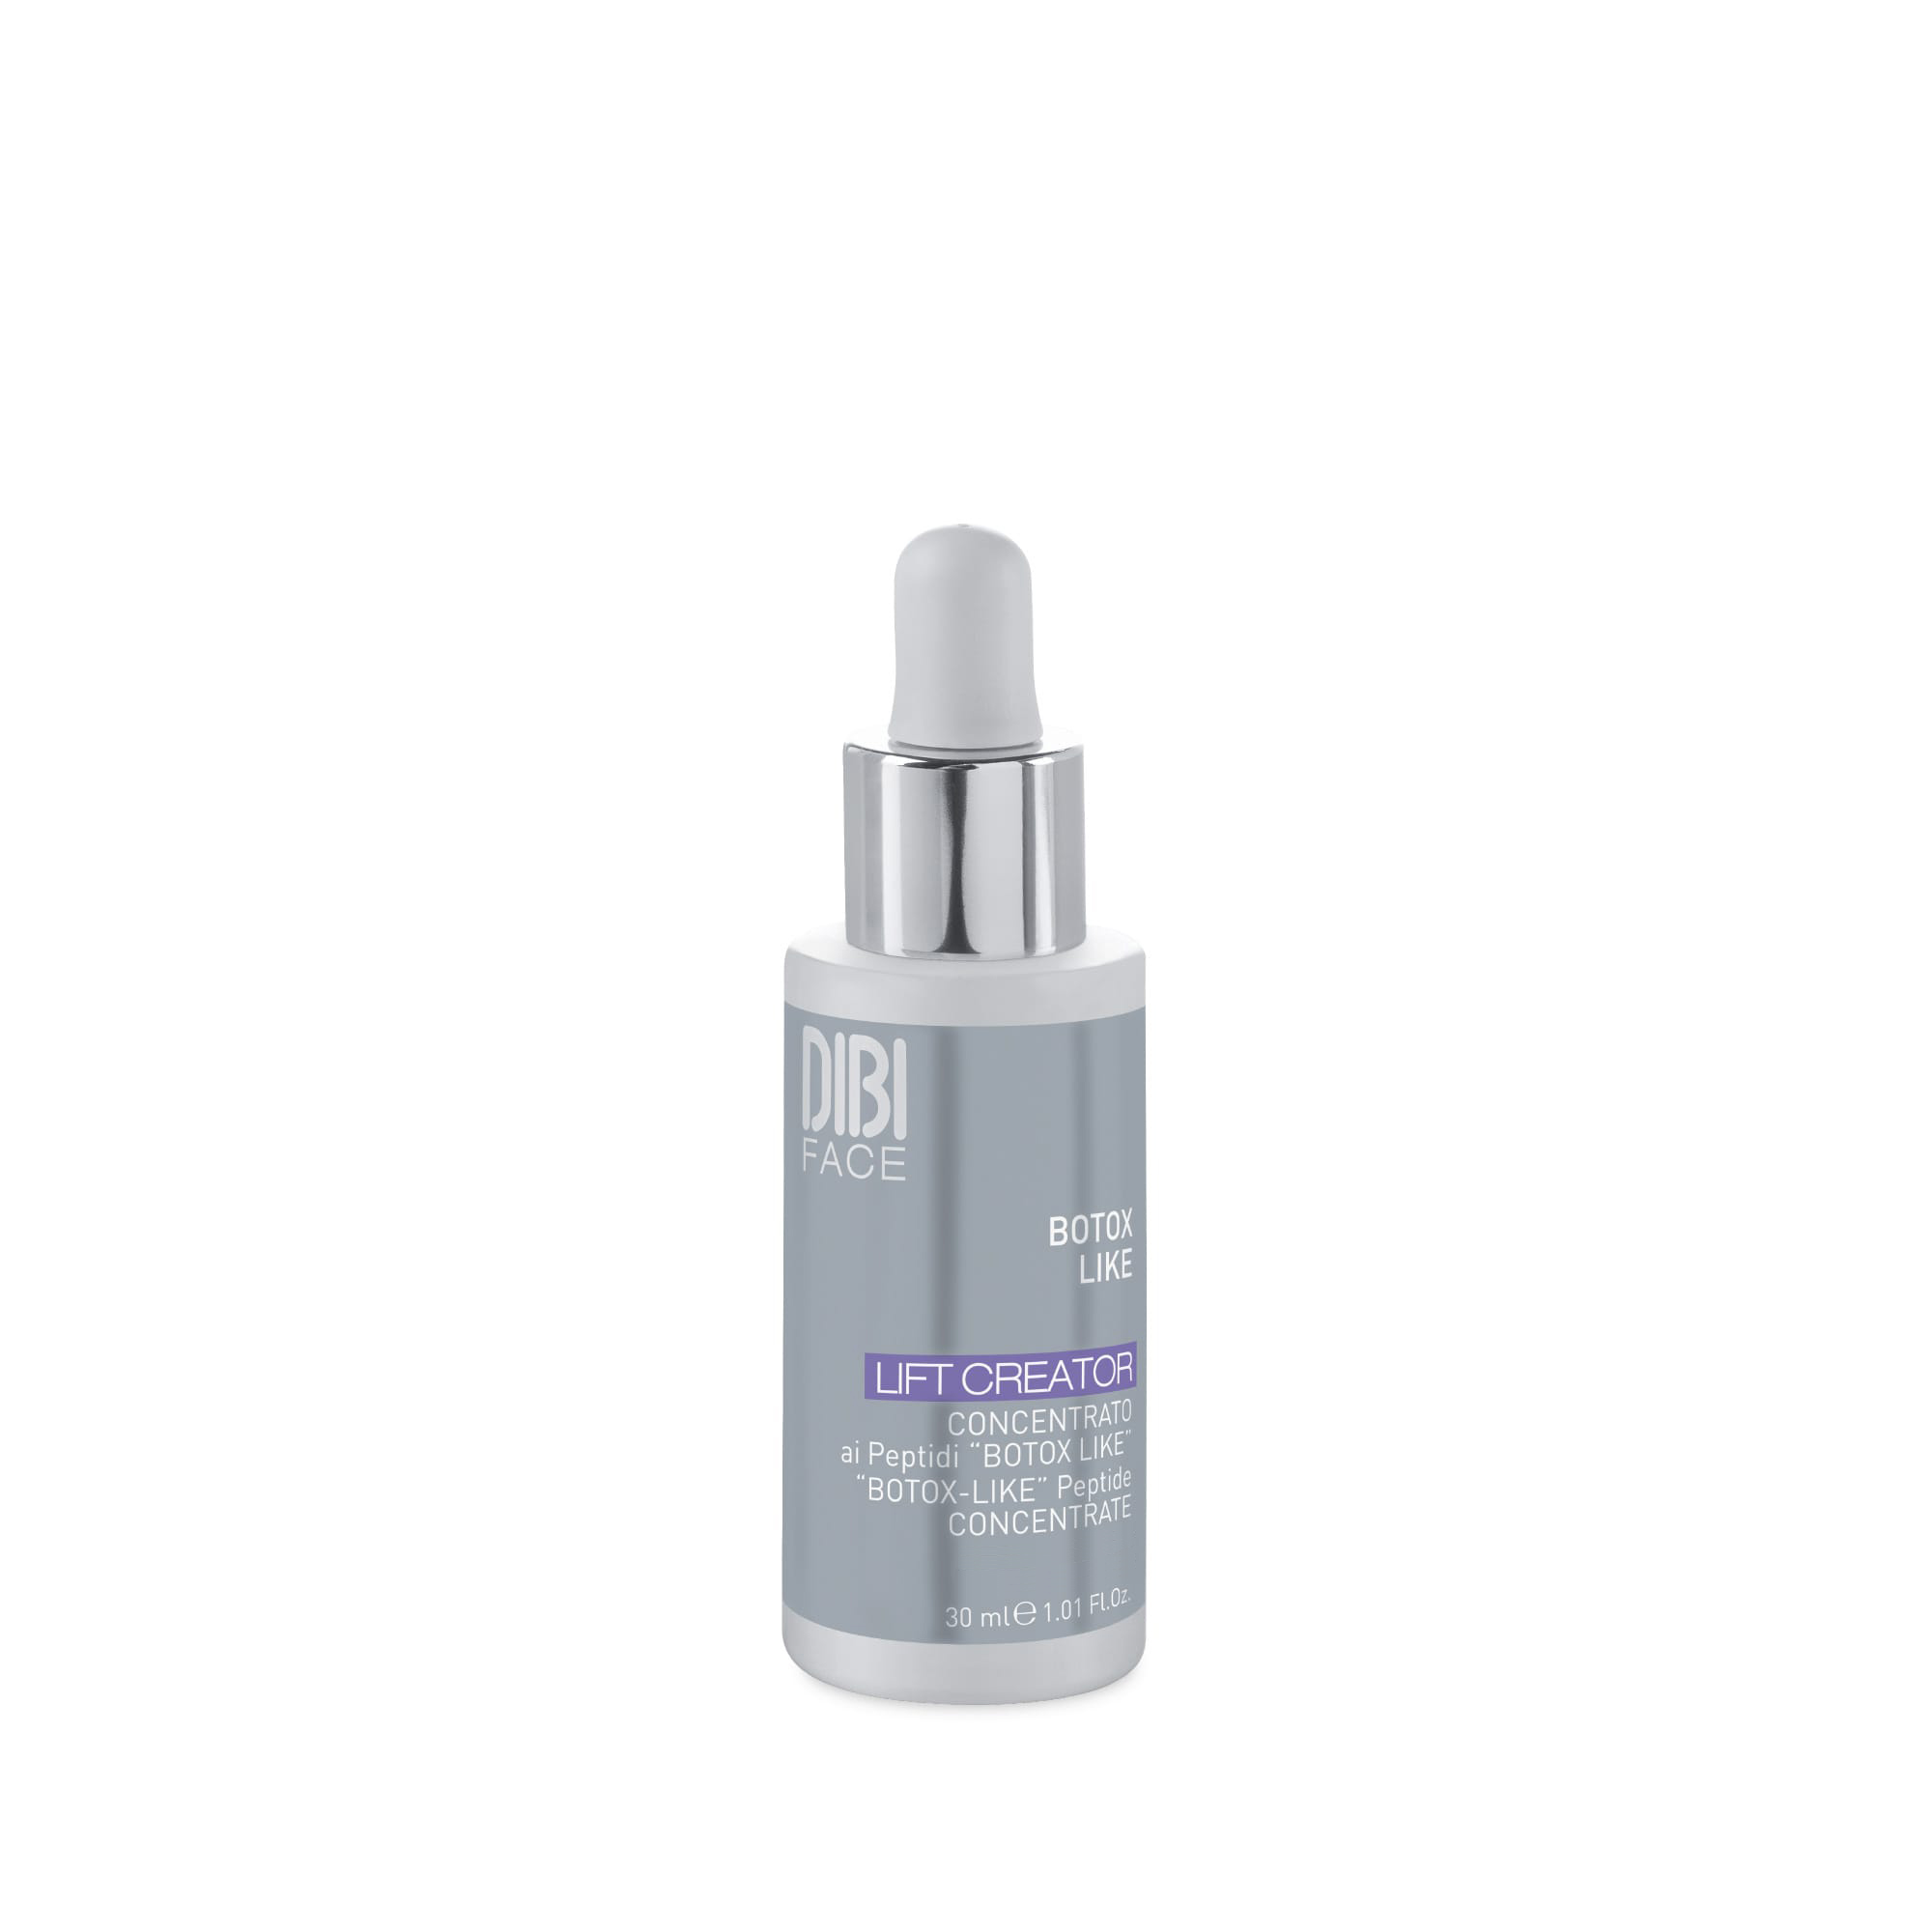 DIBI FACE LIFT CREATOR &quot;BOTOX-LIKE&quot; Peptide CONCENTRATE